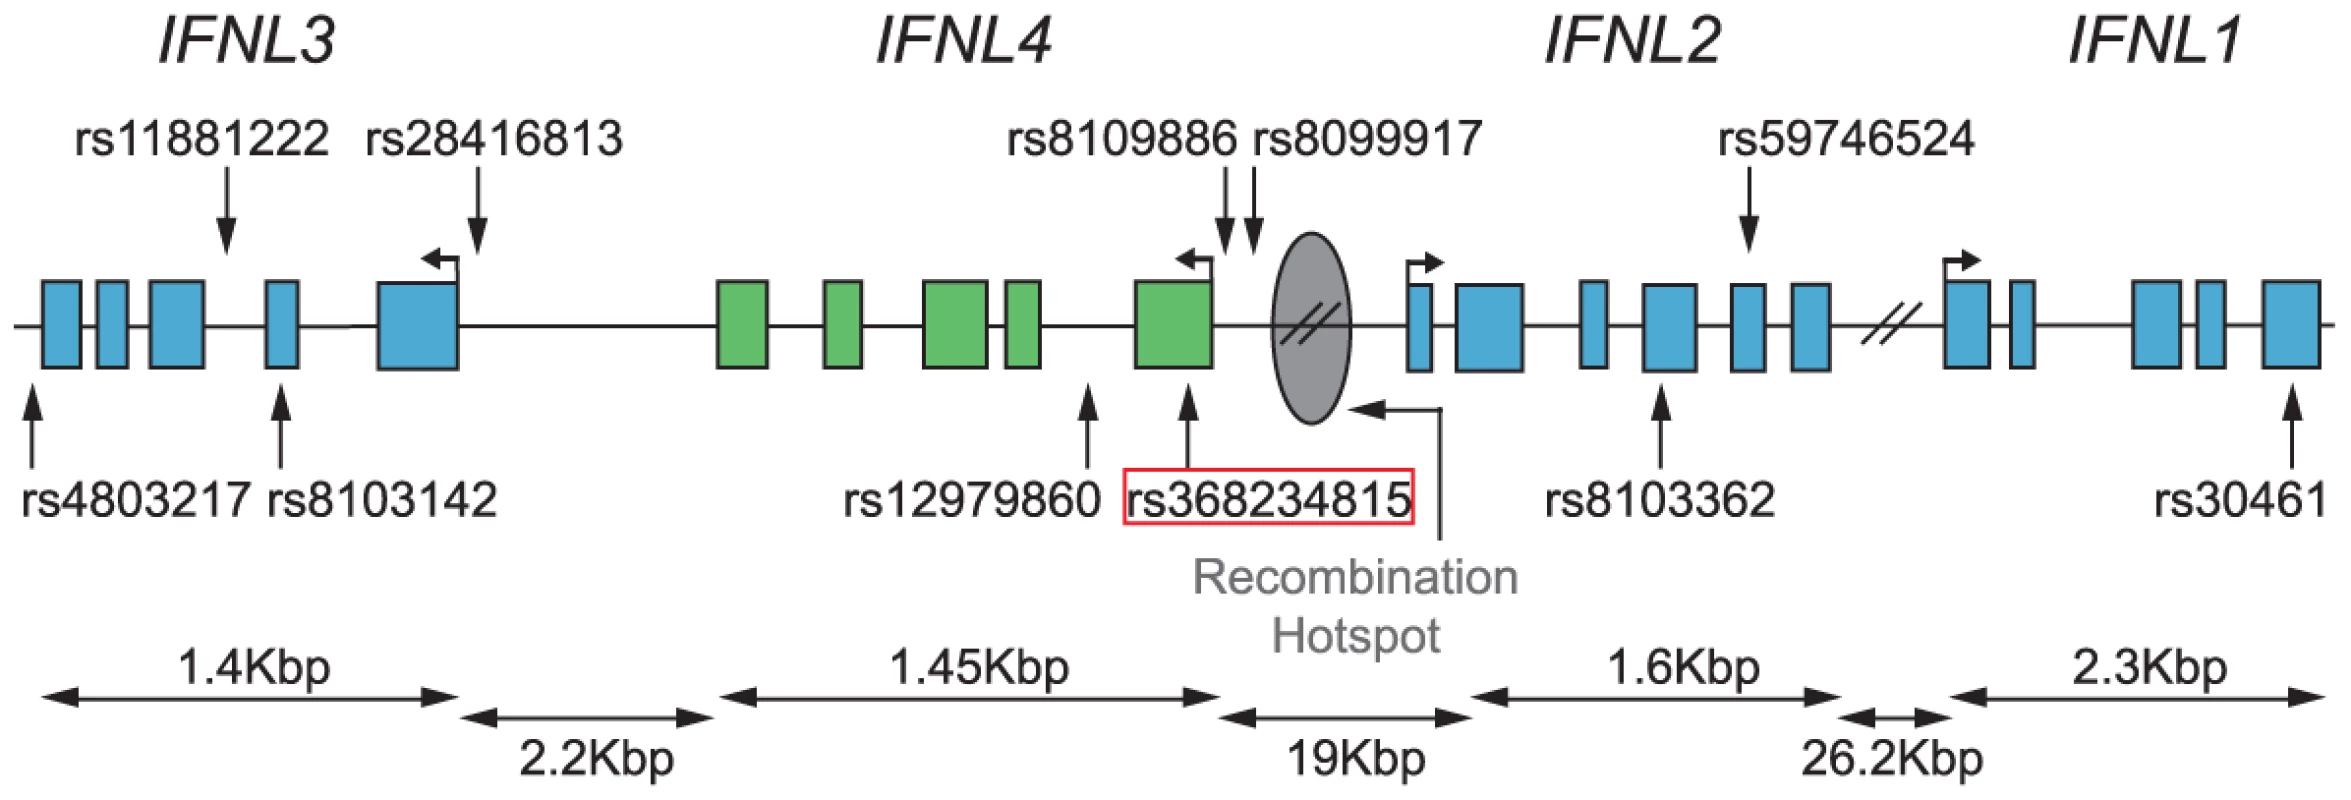 Map of the &lt;i&gt;IFNL&lt;/i&gt; locus with locations of relevant SNPs (from &lt;em class=&quot;ref&quot;&gt;&lt;b&gt;Table 2&lt;/b&gt;&lt;/em&gt;) and the inferred recombination hotspot based on recombination rates from &lt;em class=&quot;ref&quot;&gt;[60]&lt;/em&gt;.